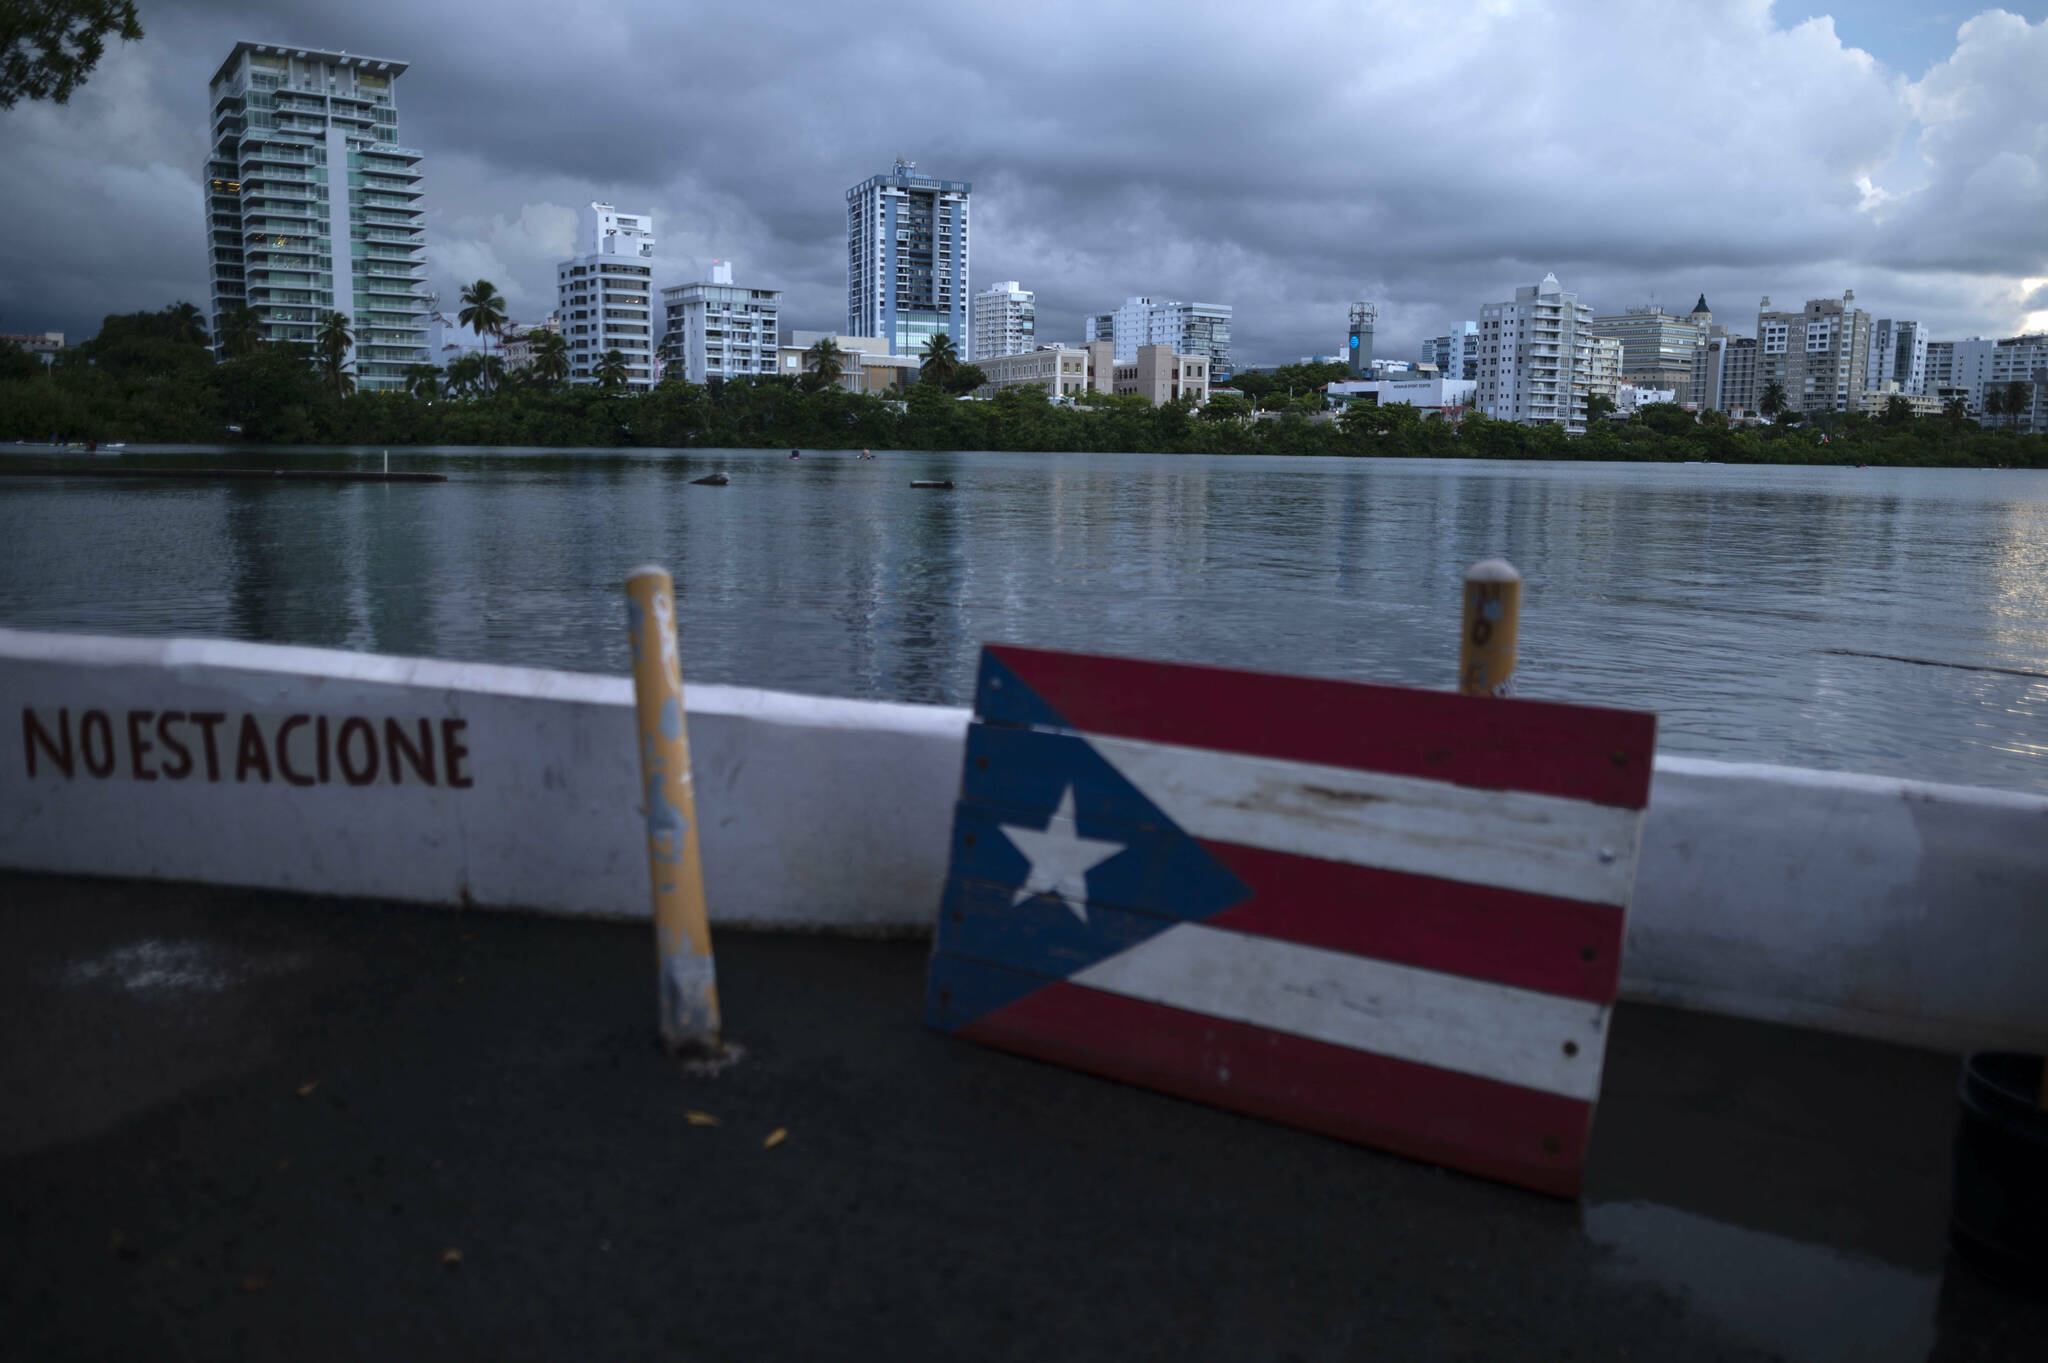 FILE - In this Sept. 30, 2021 file photo, a wooden Puerto Rican flag is displayed on the dock of the Condado lagoon in San Juan, Puerto Rico. (AP Photo/Carlos Giusti, File)